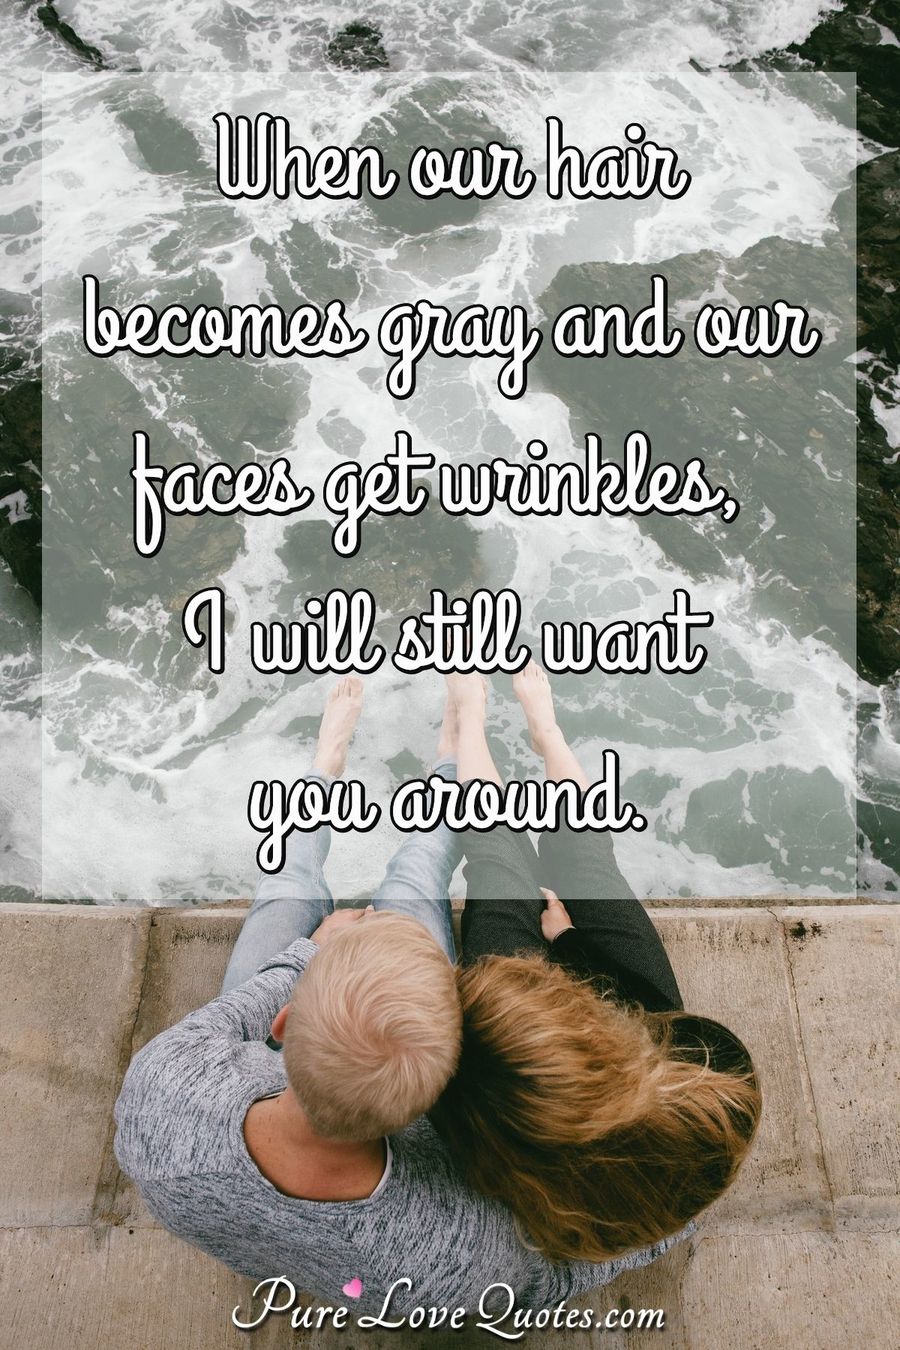 When our hair becomes gray and our faces get wrinkles, I will still want  you... | PureLoveQuotes